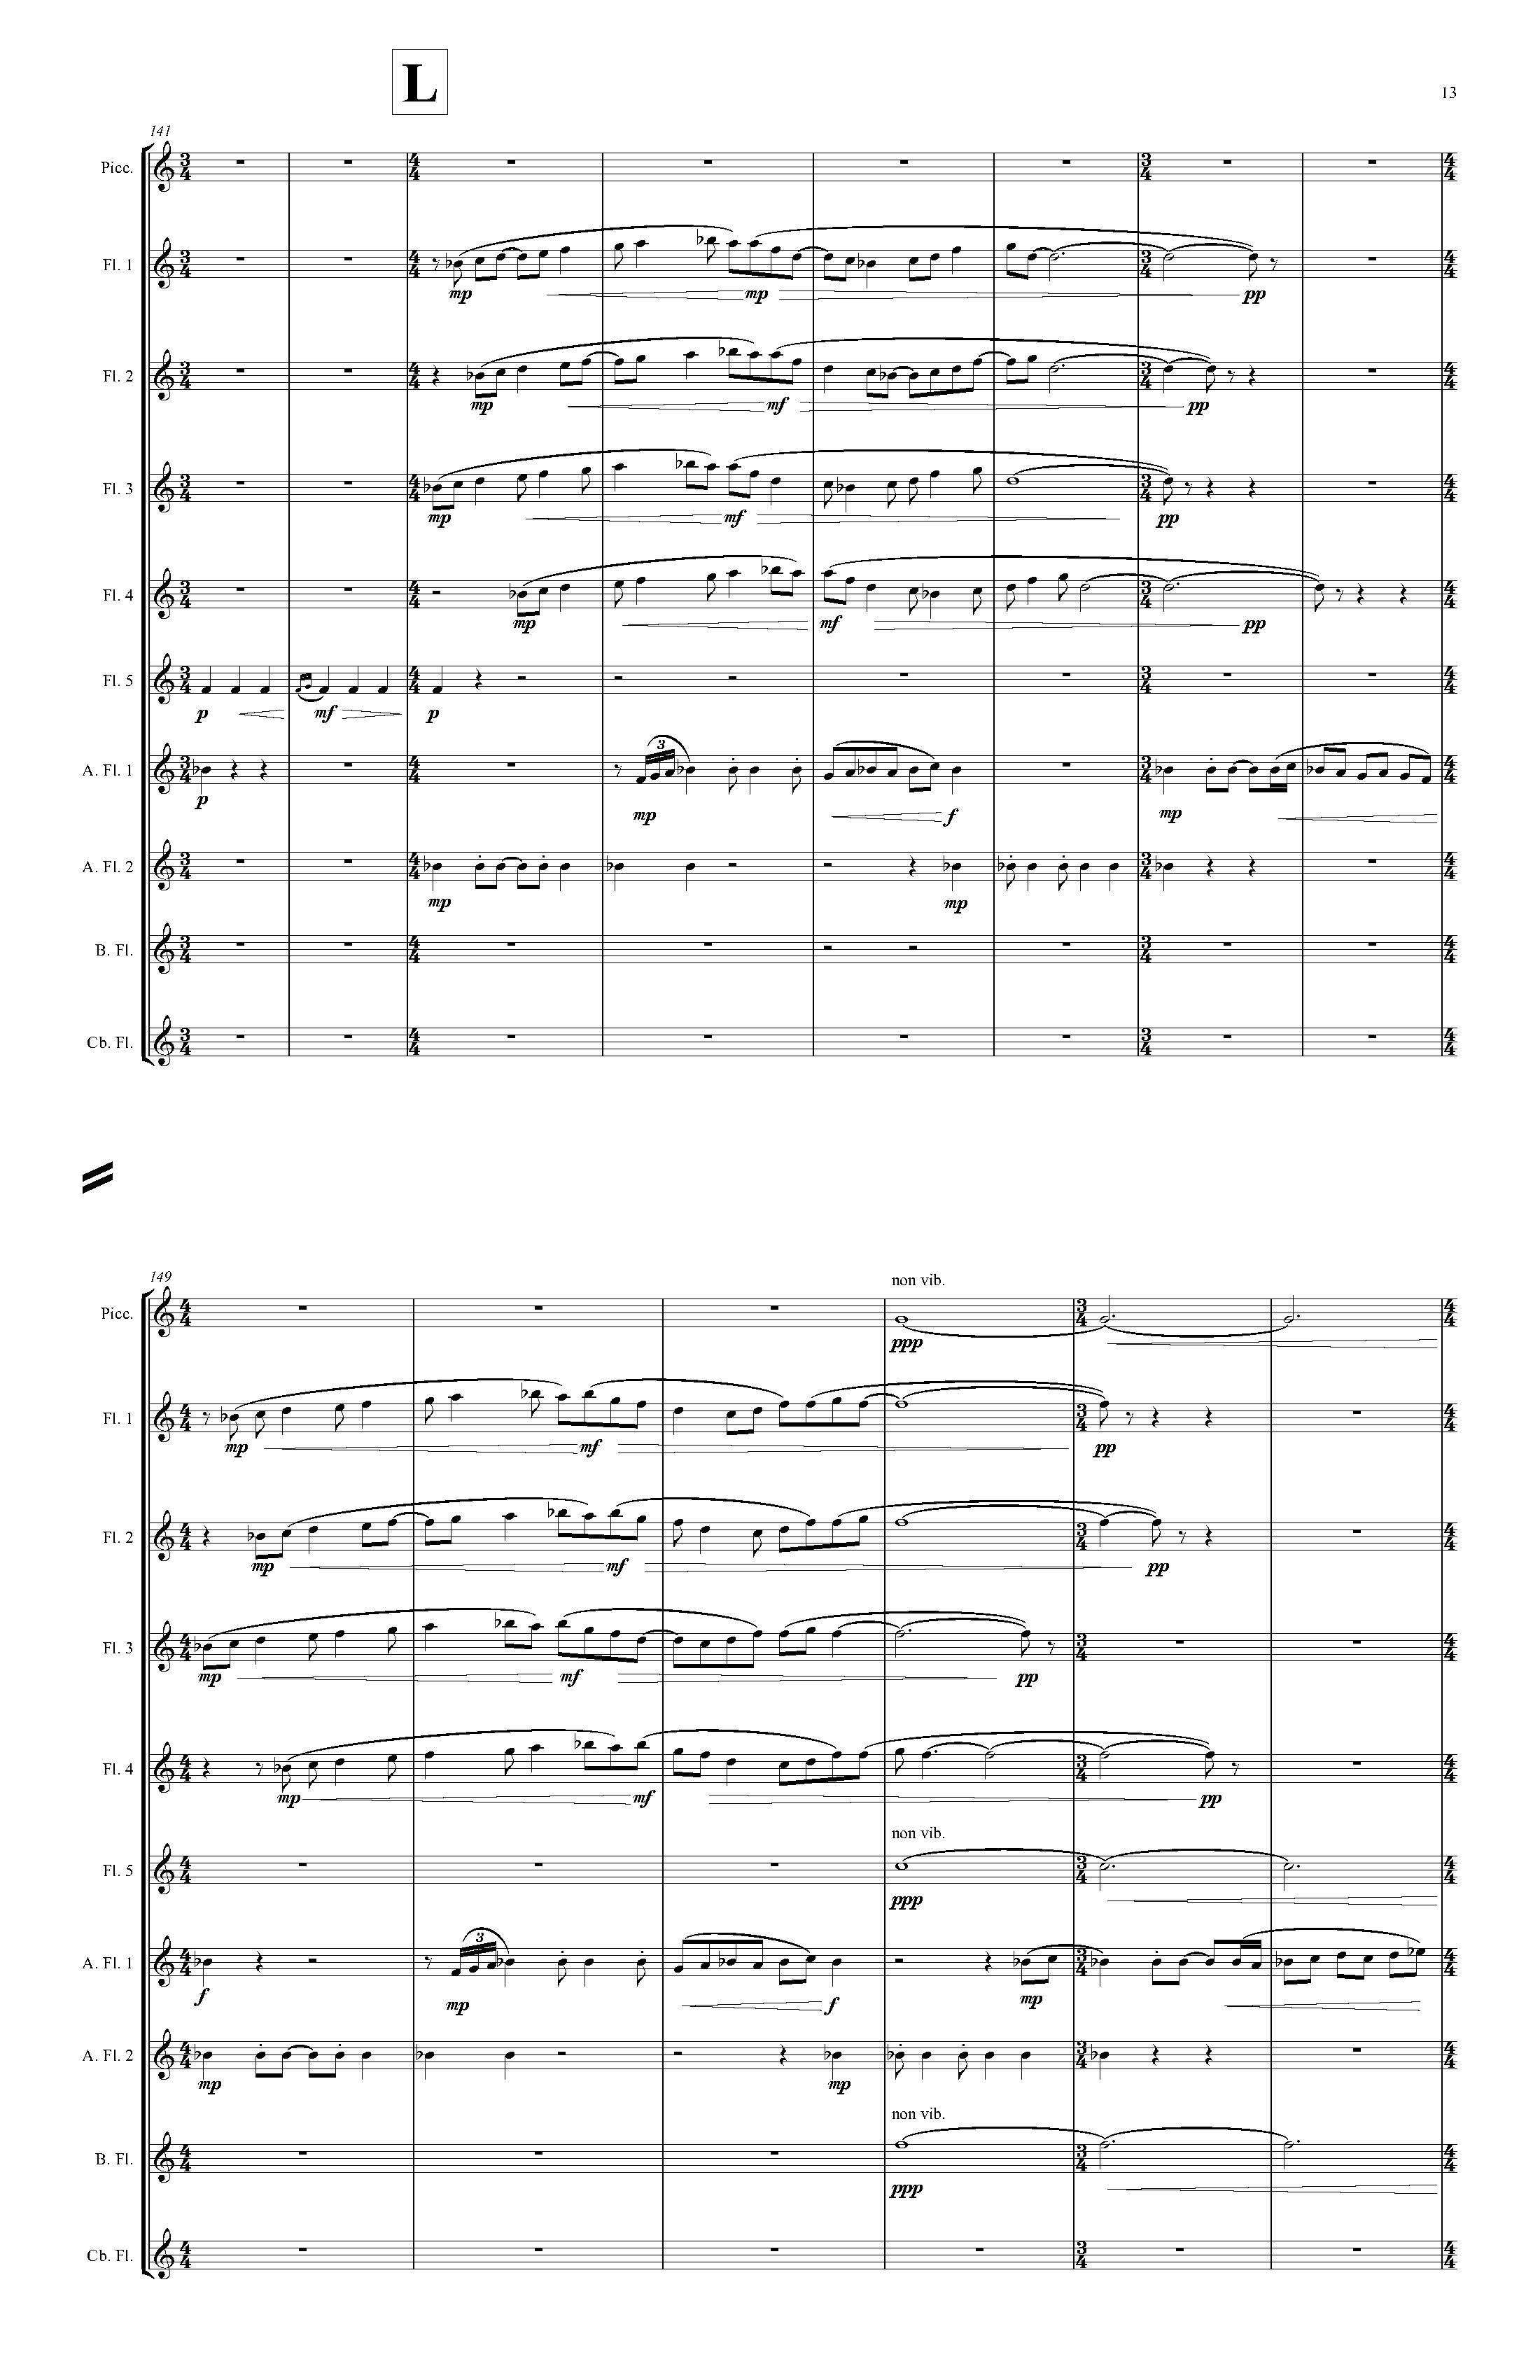 PIPES - Complete Score_Page_19.jpg